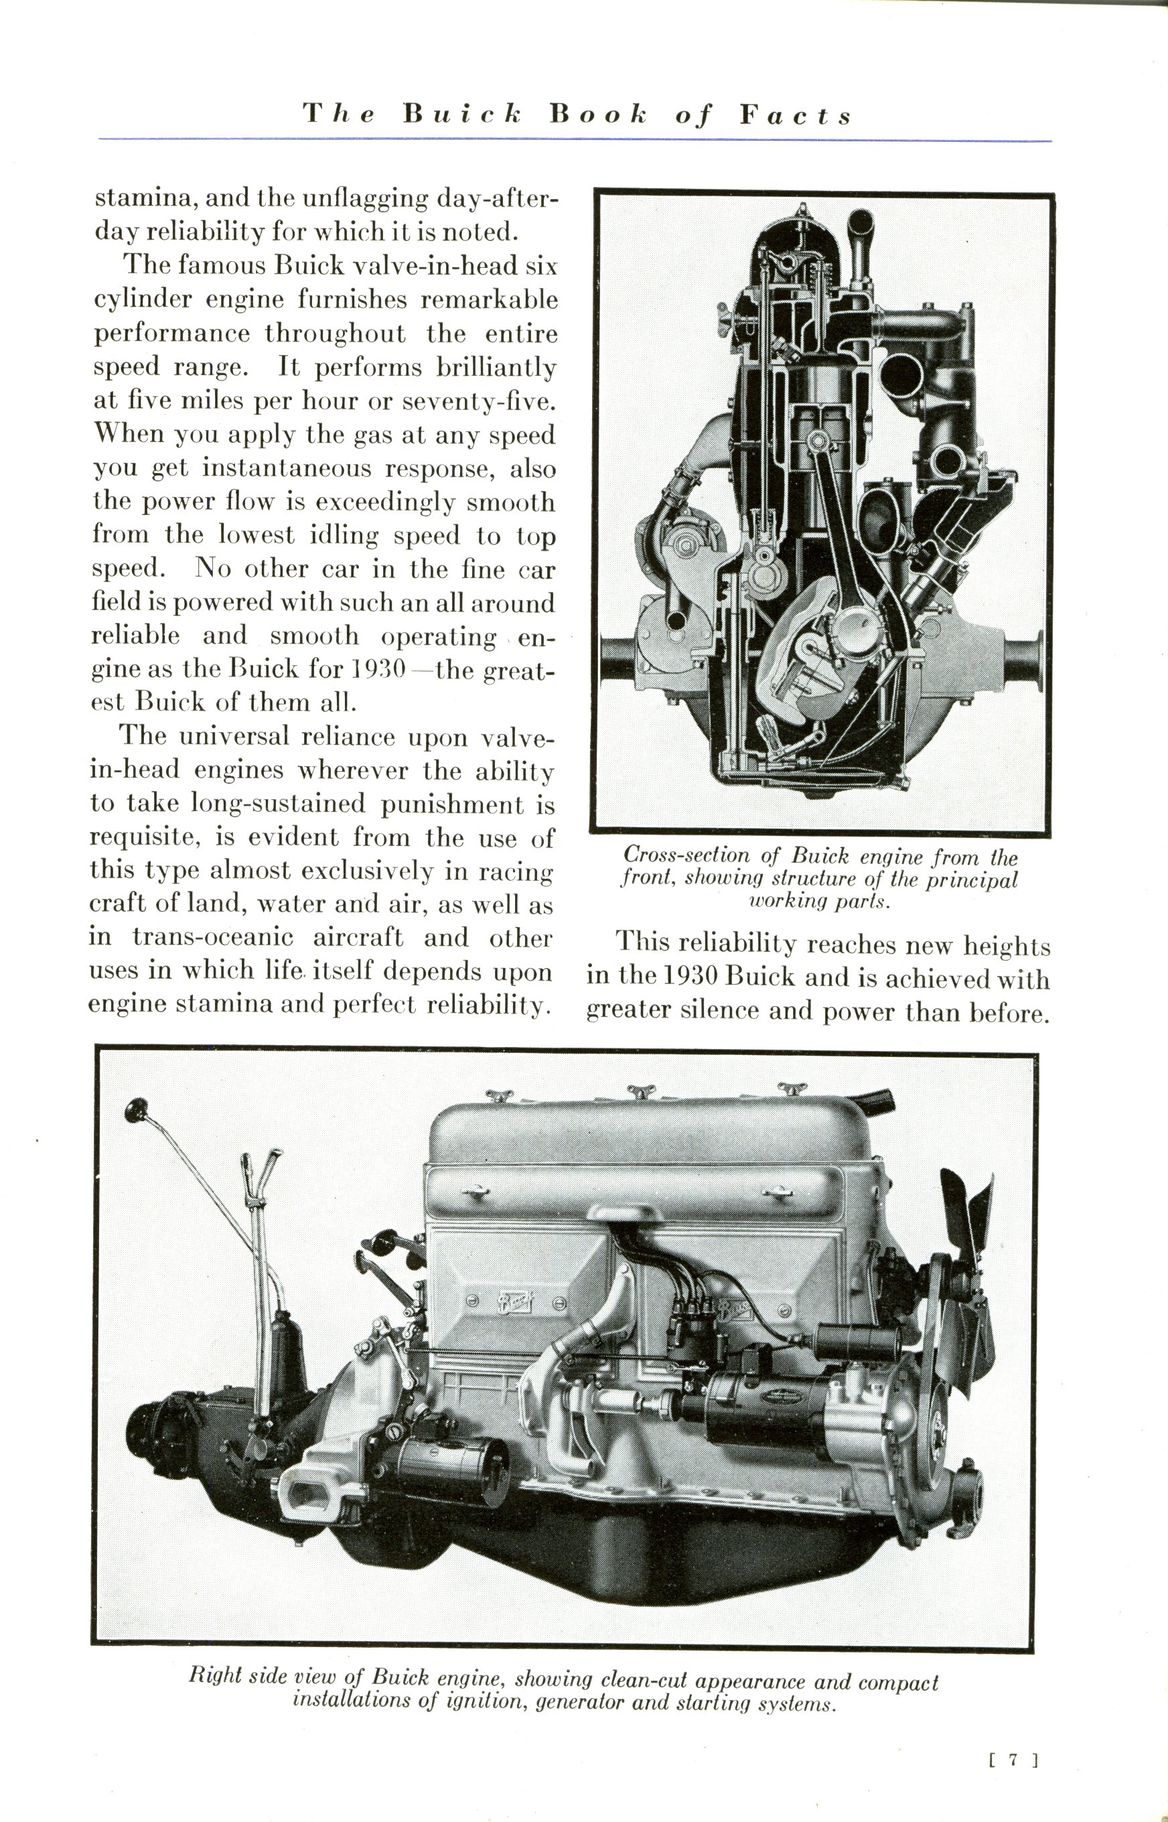 1930 Buick Book of Facts-07